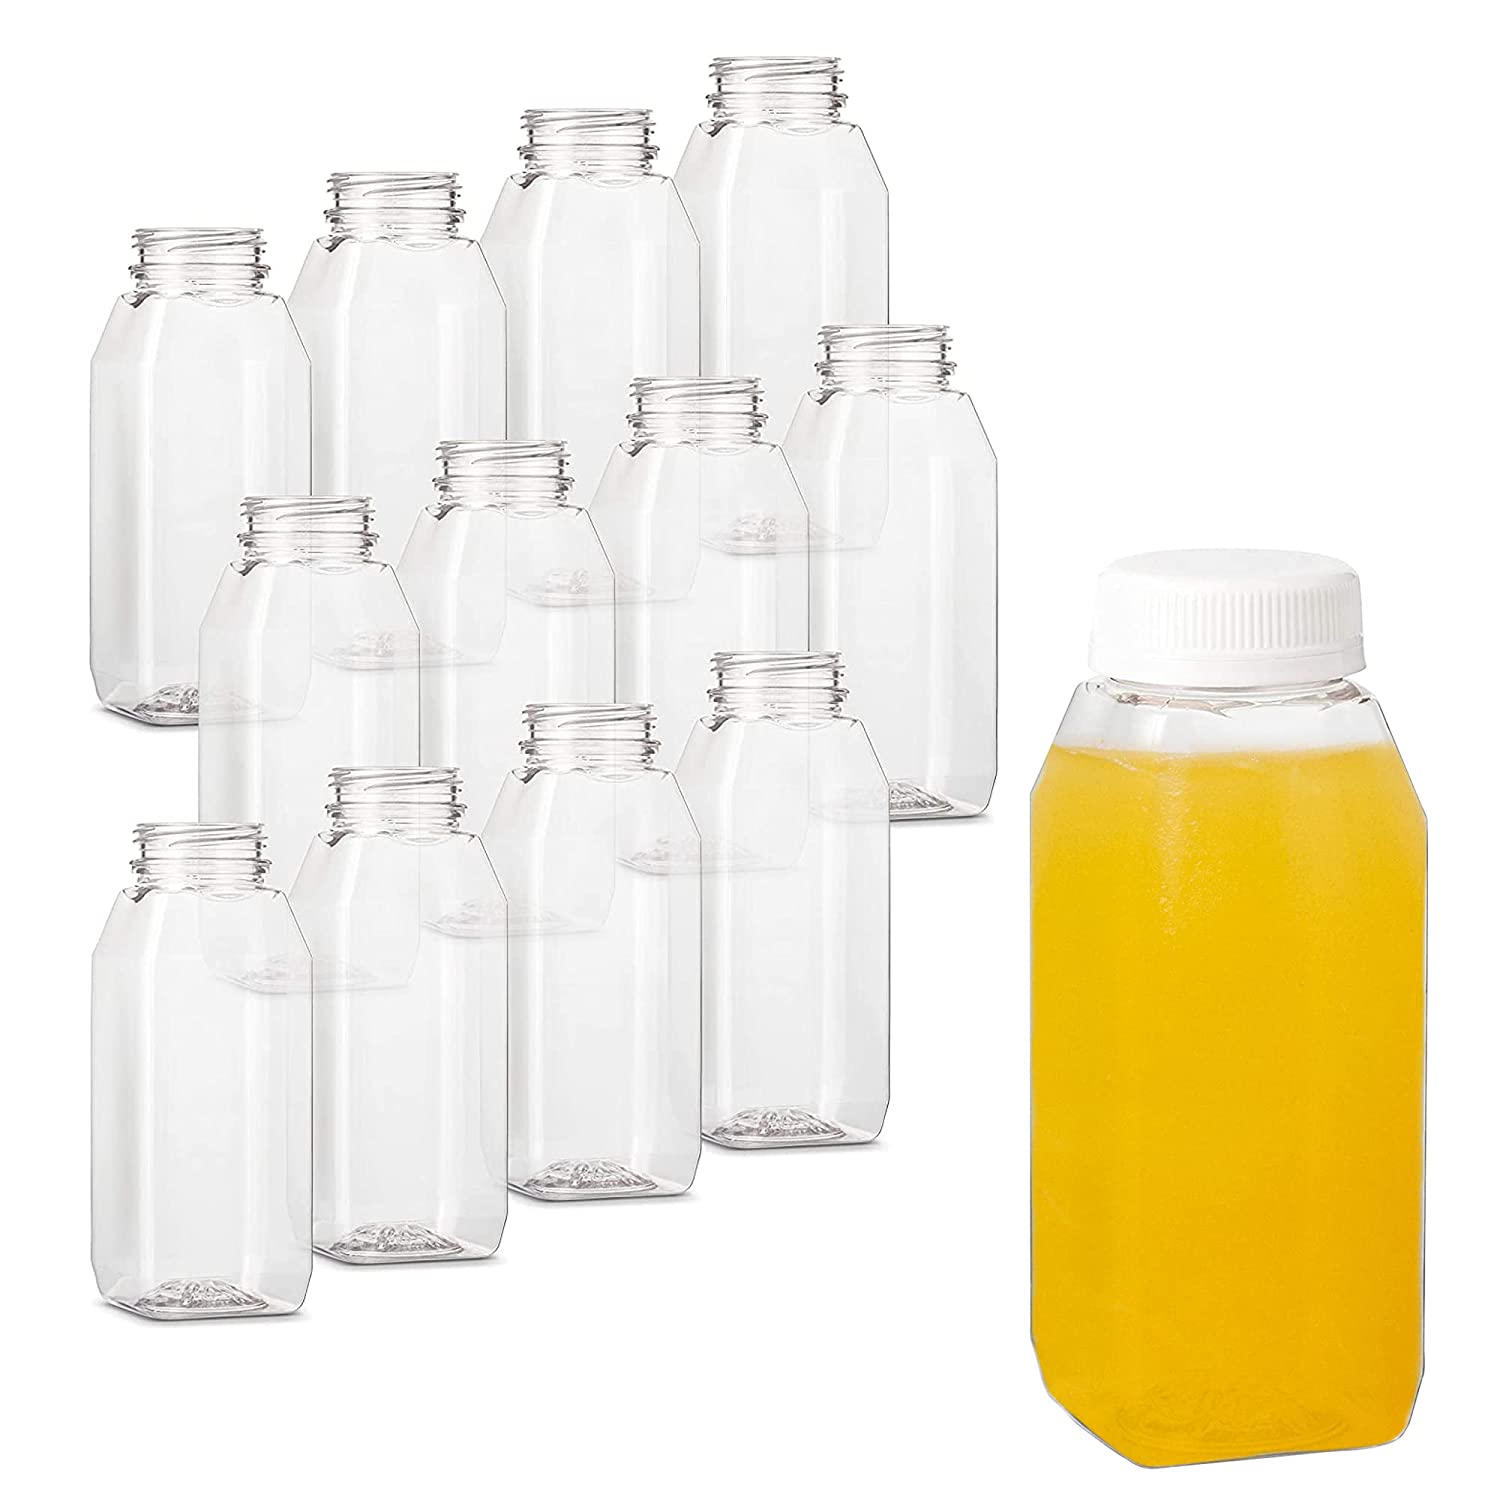 12 oz. Empty Clear Pet Plastic Juice Bottles with Tamper Evident Caps by MT Products - Set of 12 Bottles and 12